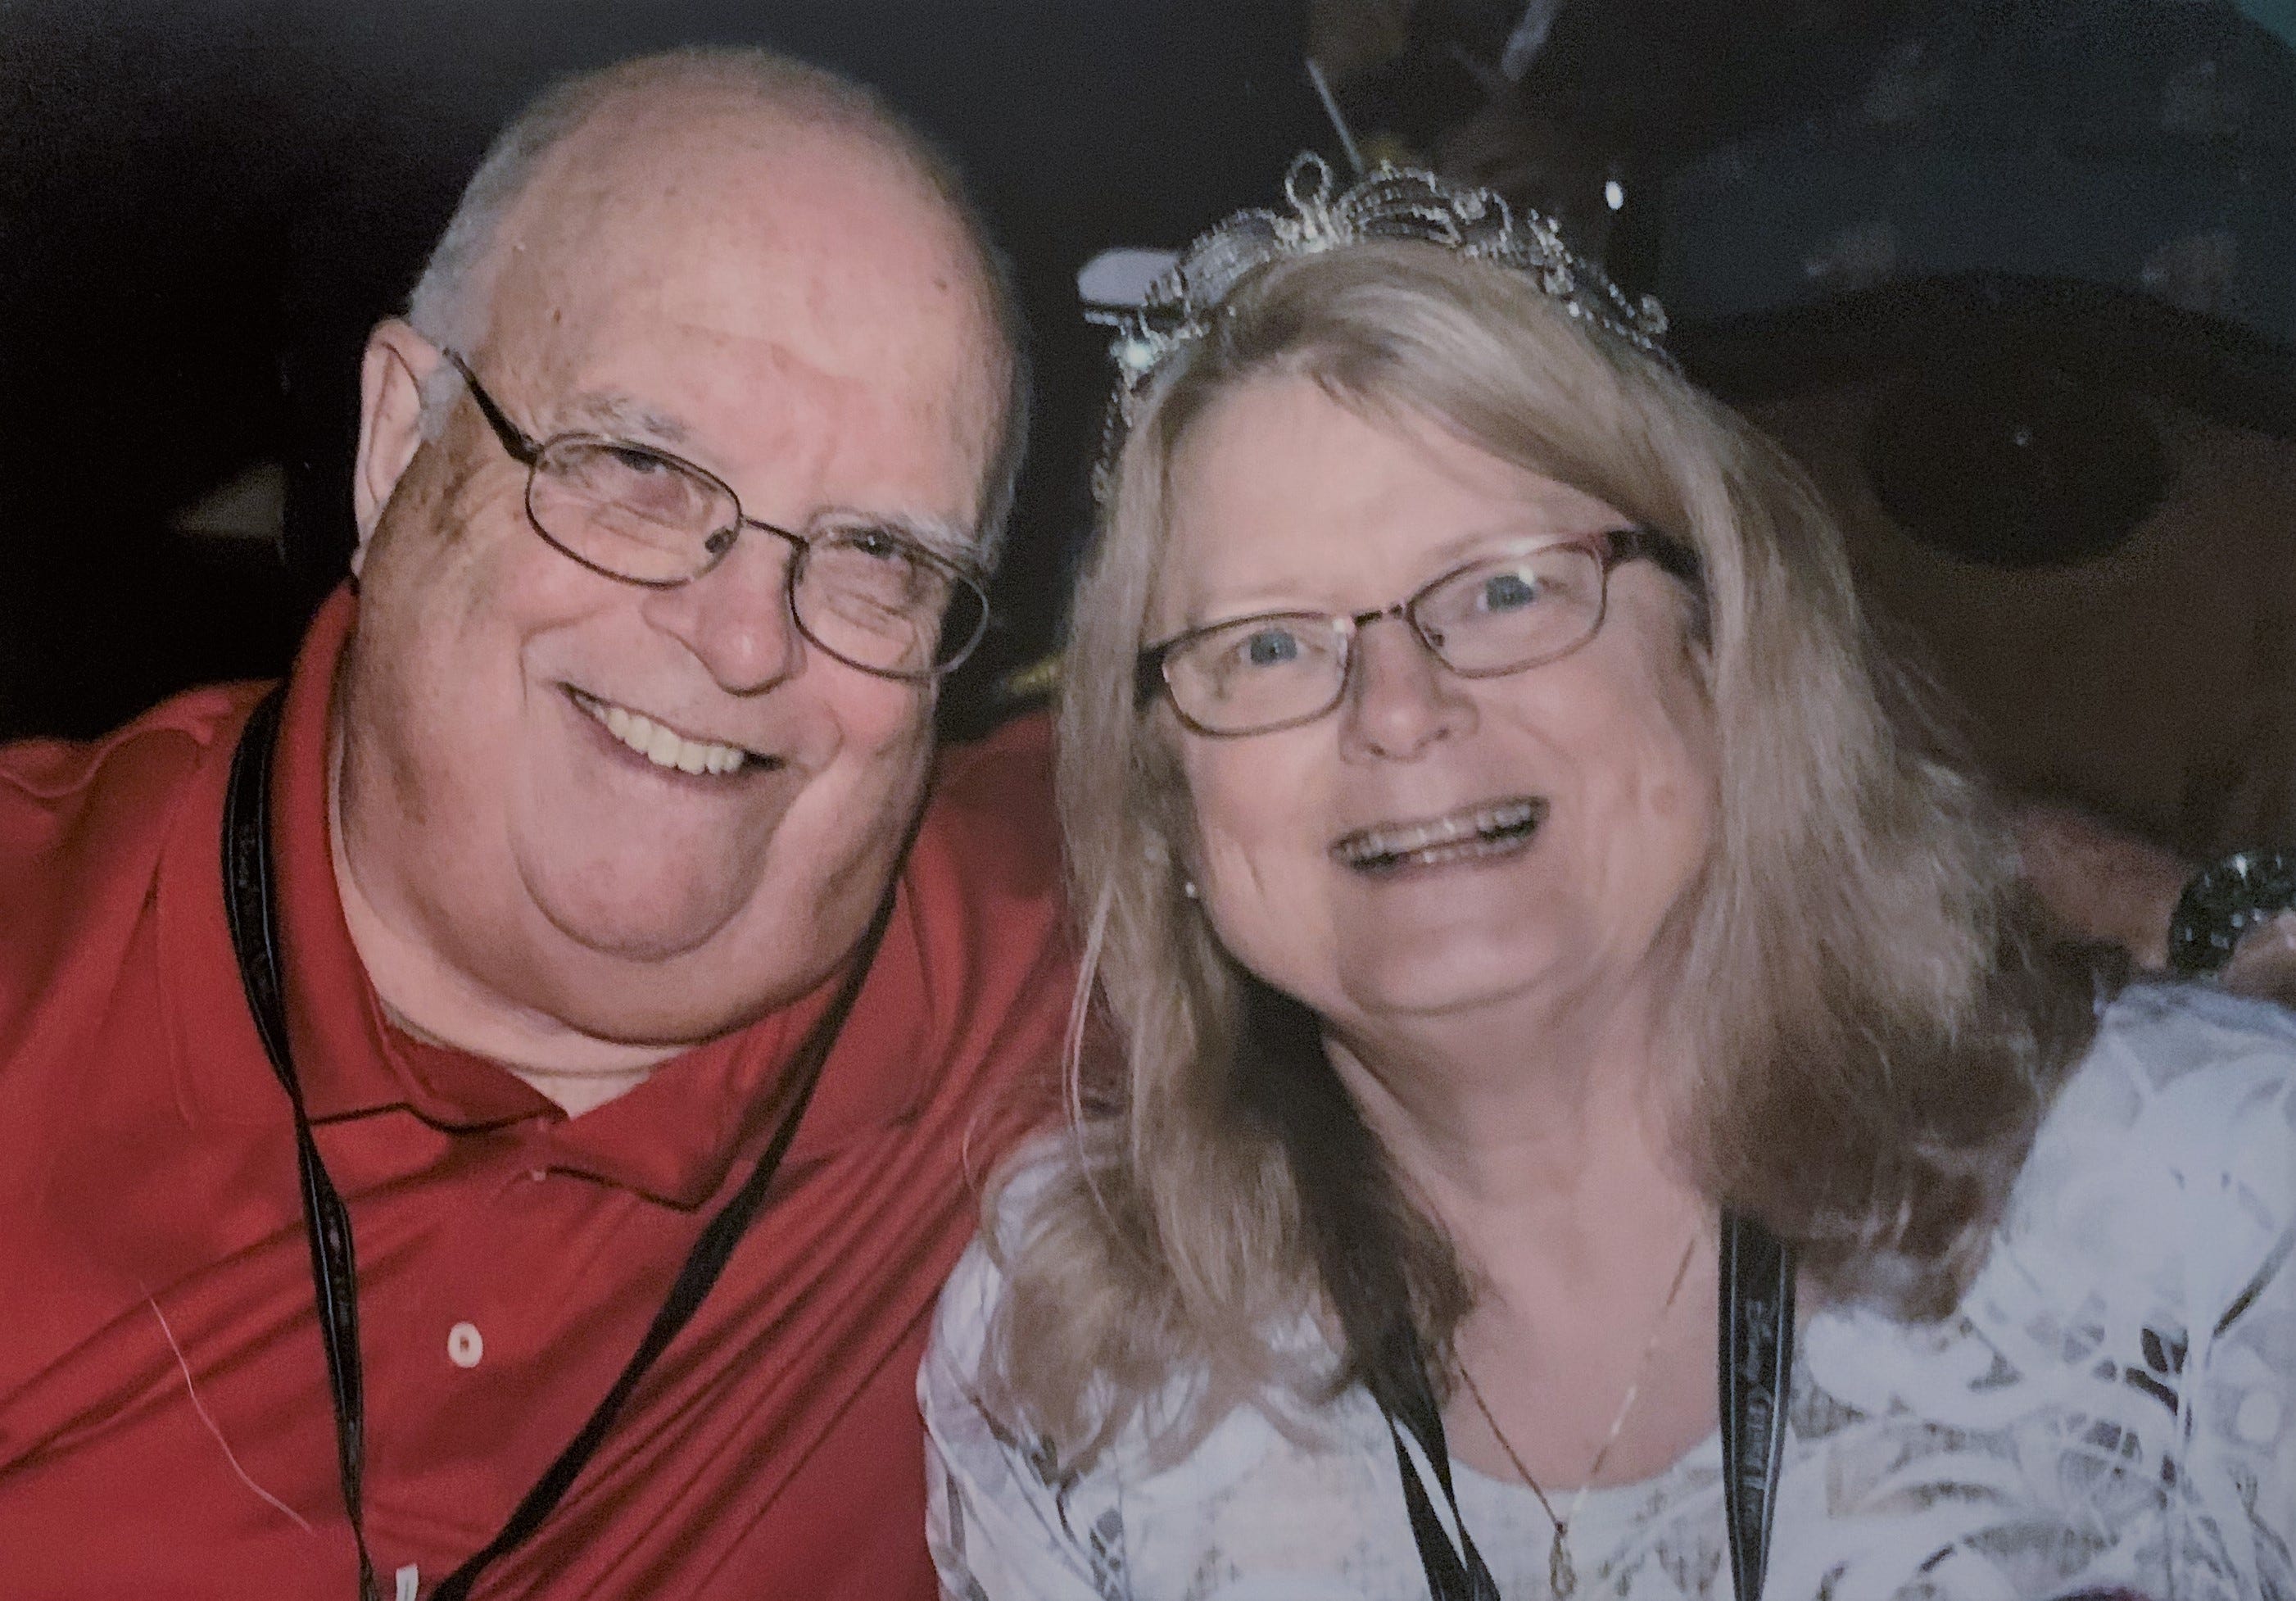 Gayle "Muggs" Isaac and his wife, Marcia Isaac, took a cruise in early March, a vacation the couple had planned for some time. By the end of the trip, the couple would both contract COVID-19 and Muggs would not survive.